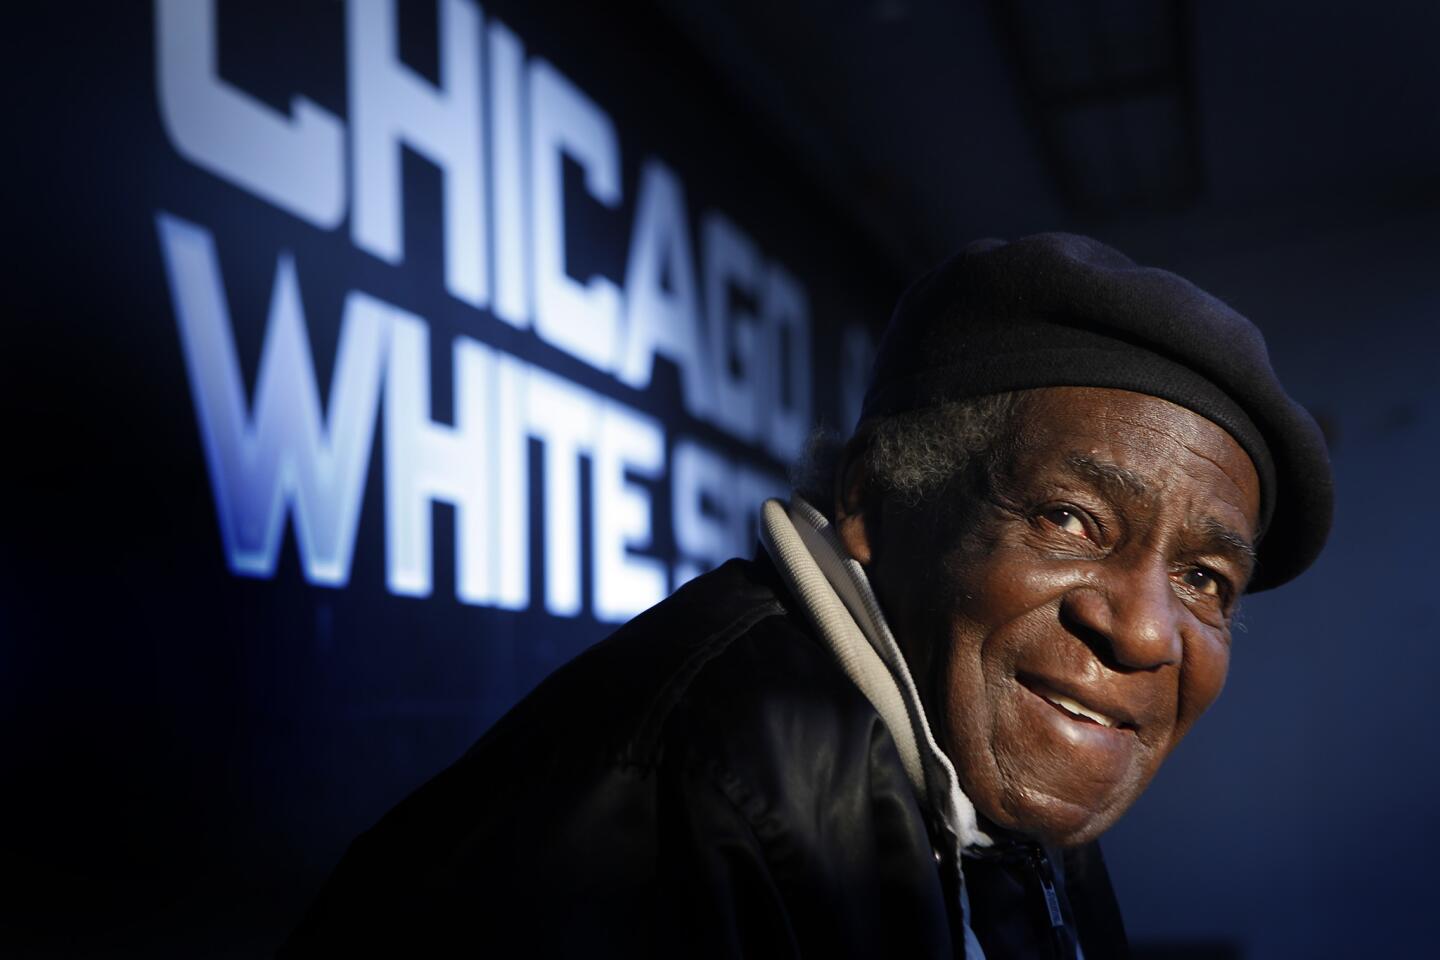 Chicago White Sox legend Minnie Minoso died in Chicago on March 1, 2015, according to his family. He was 90. Here he is at U.S. Cellular Field, on April 6, 2011.